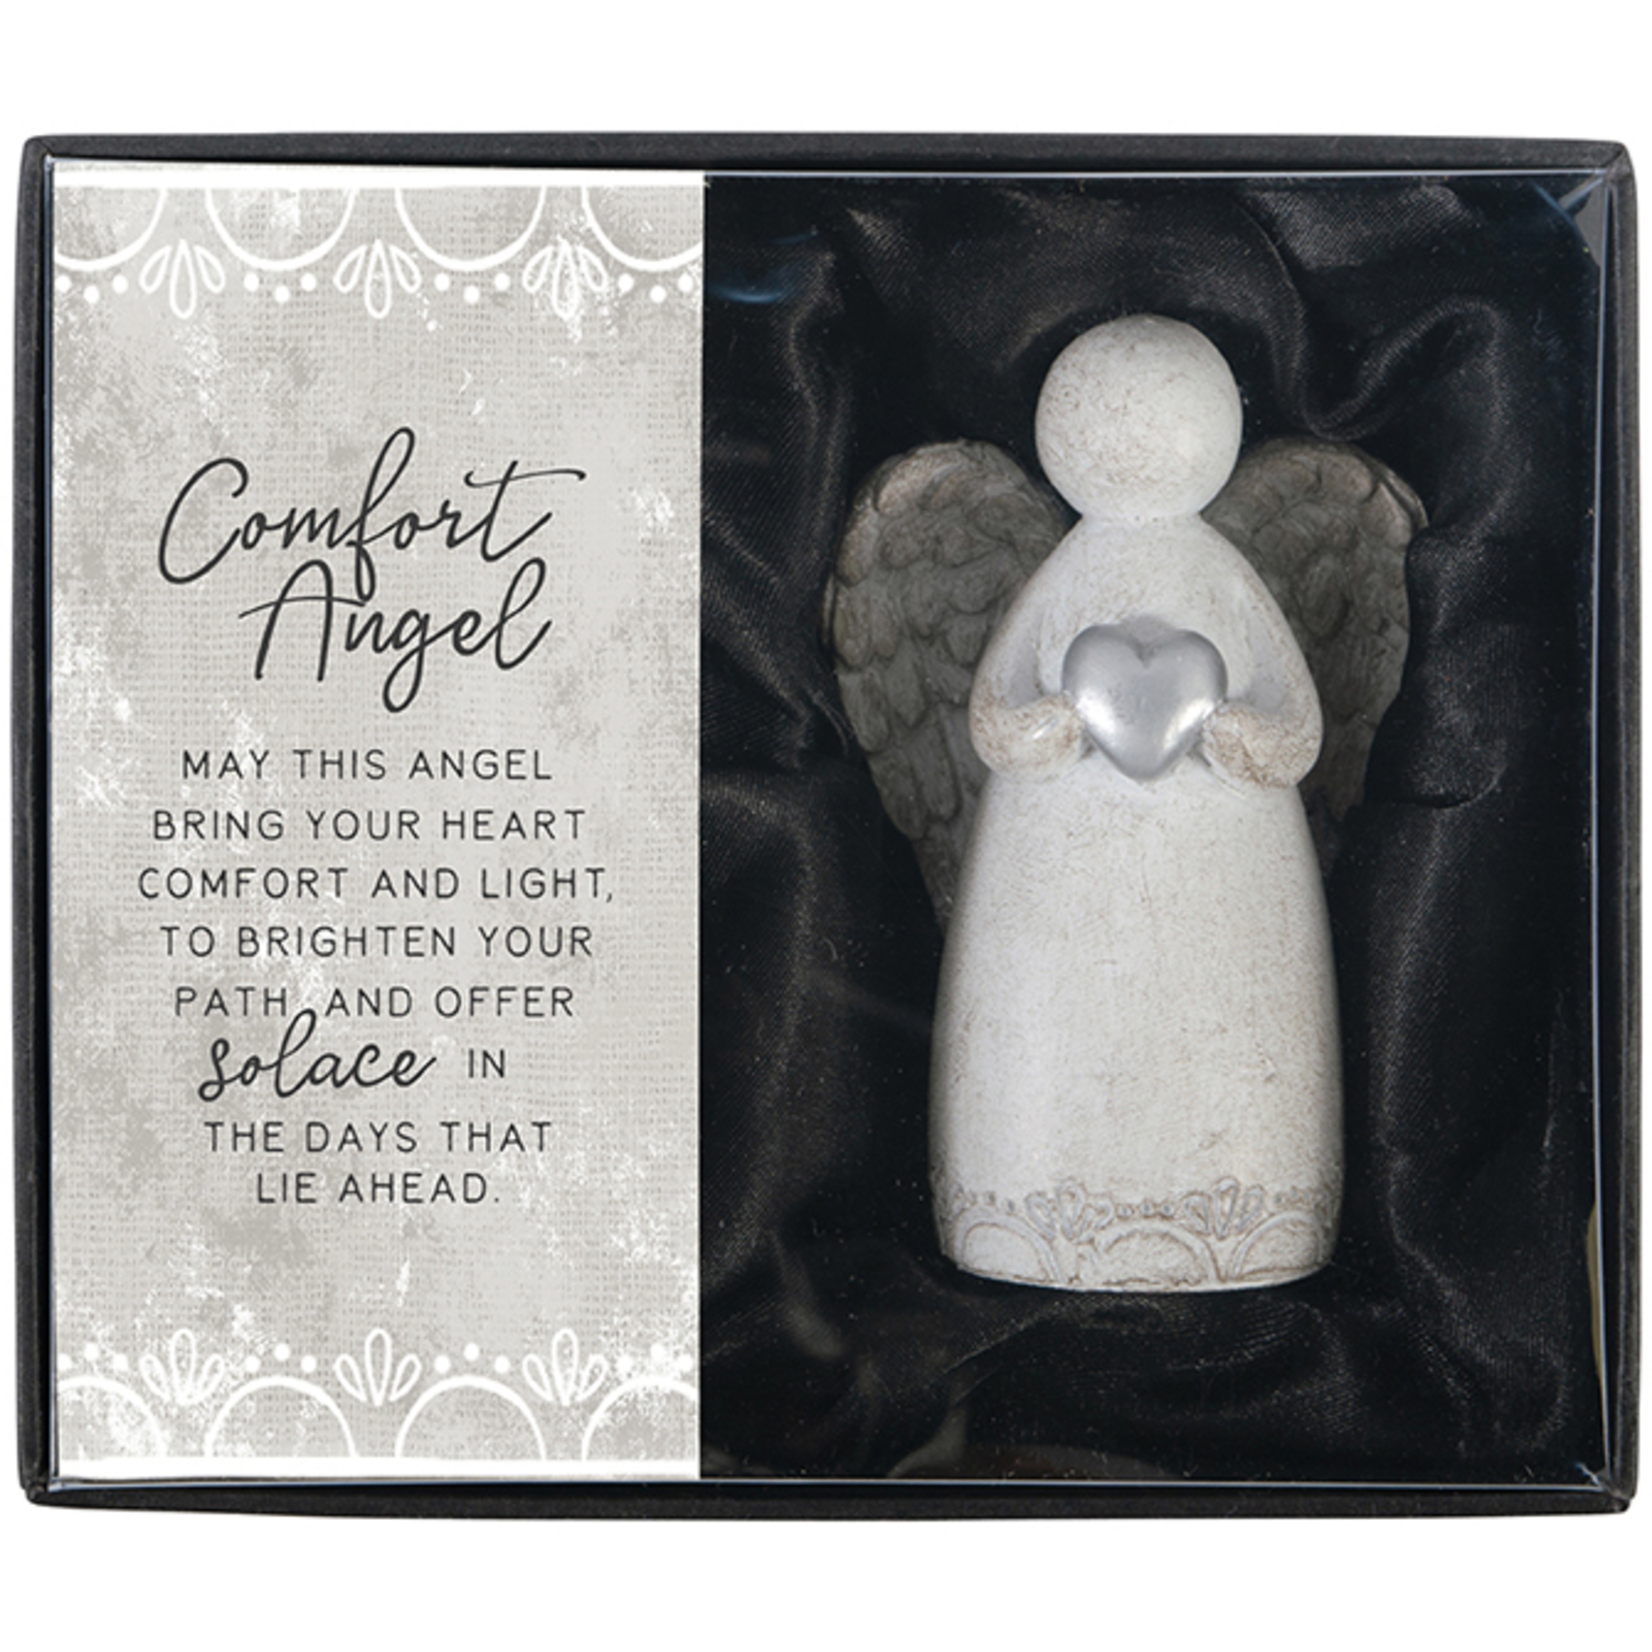 Carson Gift Boxed Angel “Comfort”